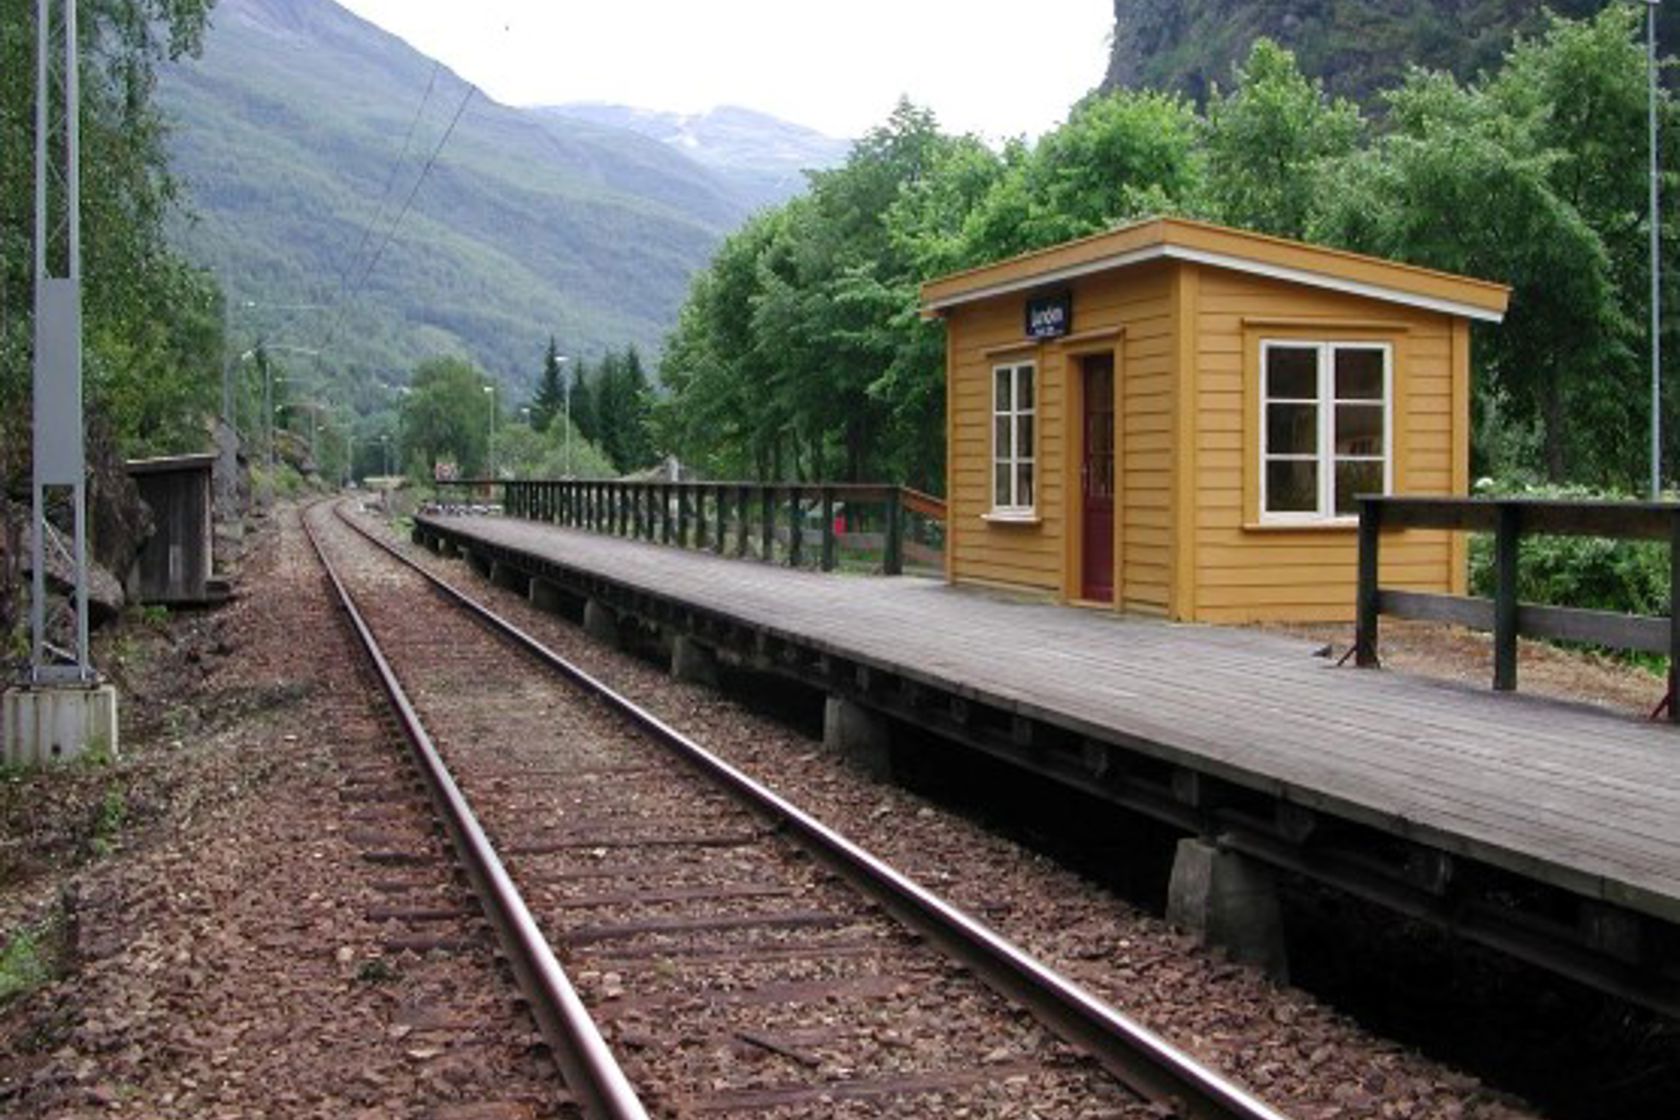 Exterior view of Lunden station